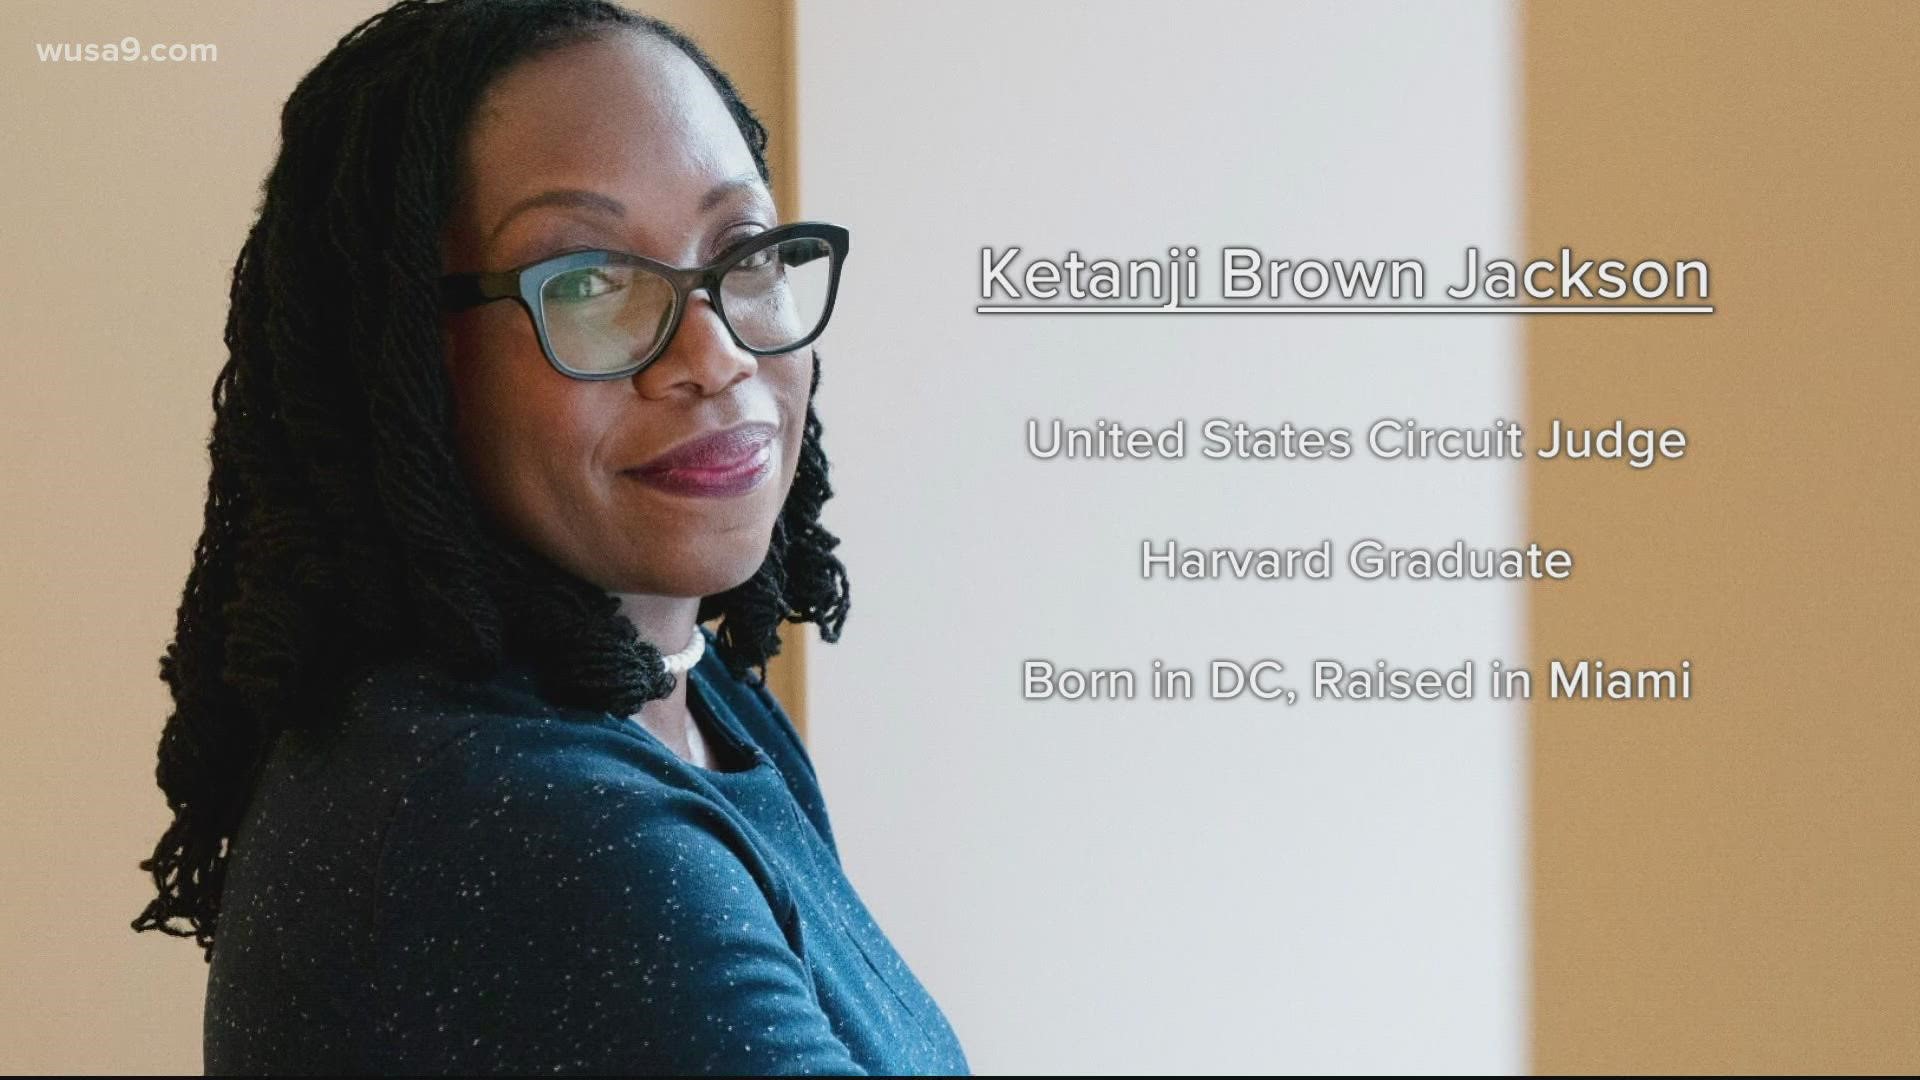 Ketanji Brown Jackson, A Defender of Federal Union Rights, is Now